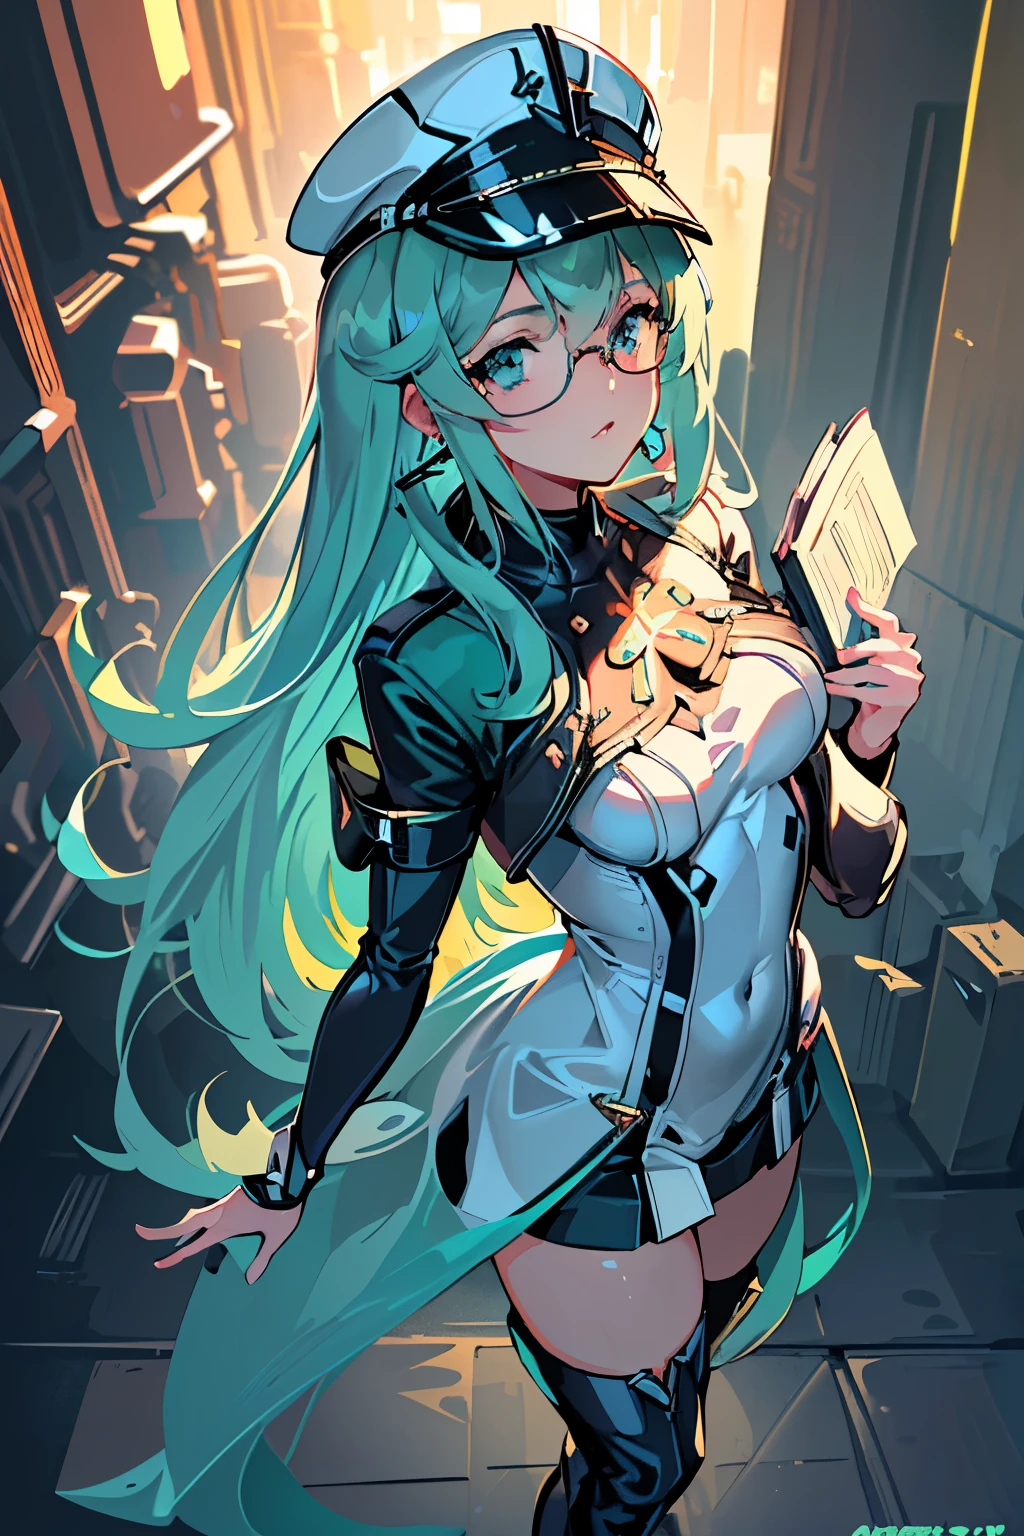 Anime, Girl, (((1girl))), (((Waifu, Xenoblade Chronicles 2, Pneuma Waifu))), (((Seafoam Green Hair, Long Hair))), ((Seafoam Green Eyes eyes:1.3, Upturned Eyes: 1, Perfect Eyes, Beautiful Detailed Eyes, Gradient eyes: 1, Finely Detailed Beautiful Eyes: 1, Symmetrical Eyes: 1, Big Highlight On Eyes: 1.2)), (((Lustrous Skin: 1.5, Bright Skin: 1.5, Skin Fair, Shiny Skin, Very Shiny Skin, Shiny Body, Plastic Glitter Skin, Exaggerated Shiny Skin, Illuminated Skin))), (Detailed Body, (Detailed Face)), Young, Idol Pose, (Best Quality), ((((Techwear))), (((Military Uniform))), (((Military Cap))), (((Military Coat))), (((Thigh-high Heeled Boots))), (((Reading Glasses))), (((Earrings)))) High Resolution, Sharp Focus, Ultra Detailed, Extremely Detailed, Extremely High Quality Artwork, (Realistic, Photorealistic: 1.37), 8k_Wallpaper, (Extremely Detailed CG 8k), (Very Fine 8K CG), ((Hyper Super Ultra Detailed Perfect Piece)), (((Flawlessmasterpiece))), Illustration, Vibrant Colors, (Intricate), High Contrast, Selective Lighting, Double Exposure, HDR (High Dynamic Range), Post-processing, Background Blur